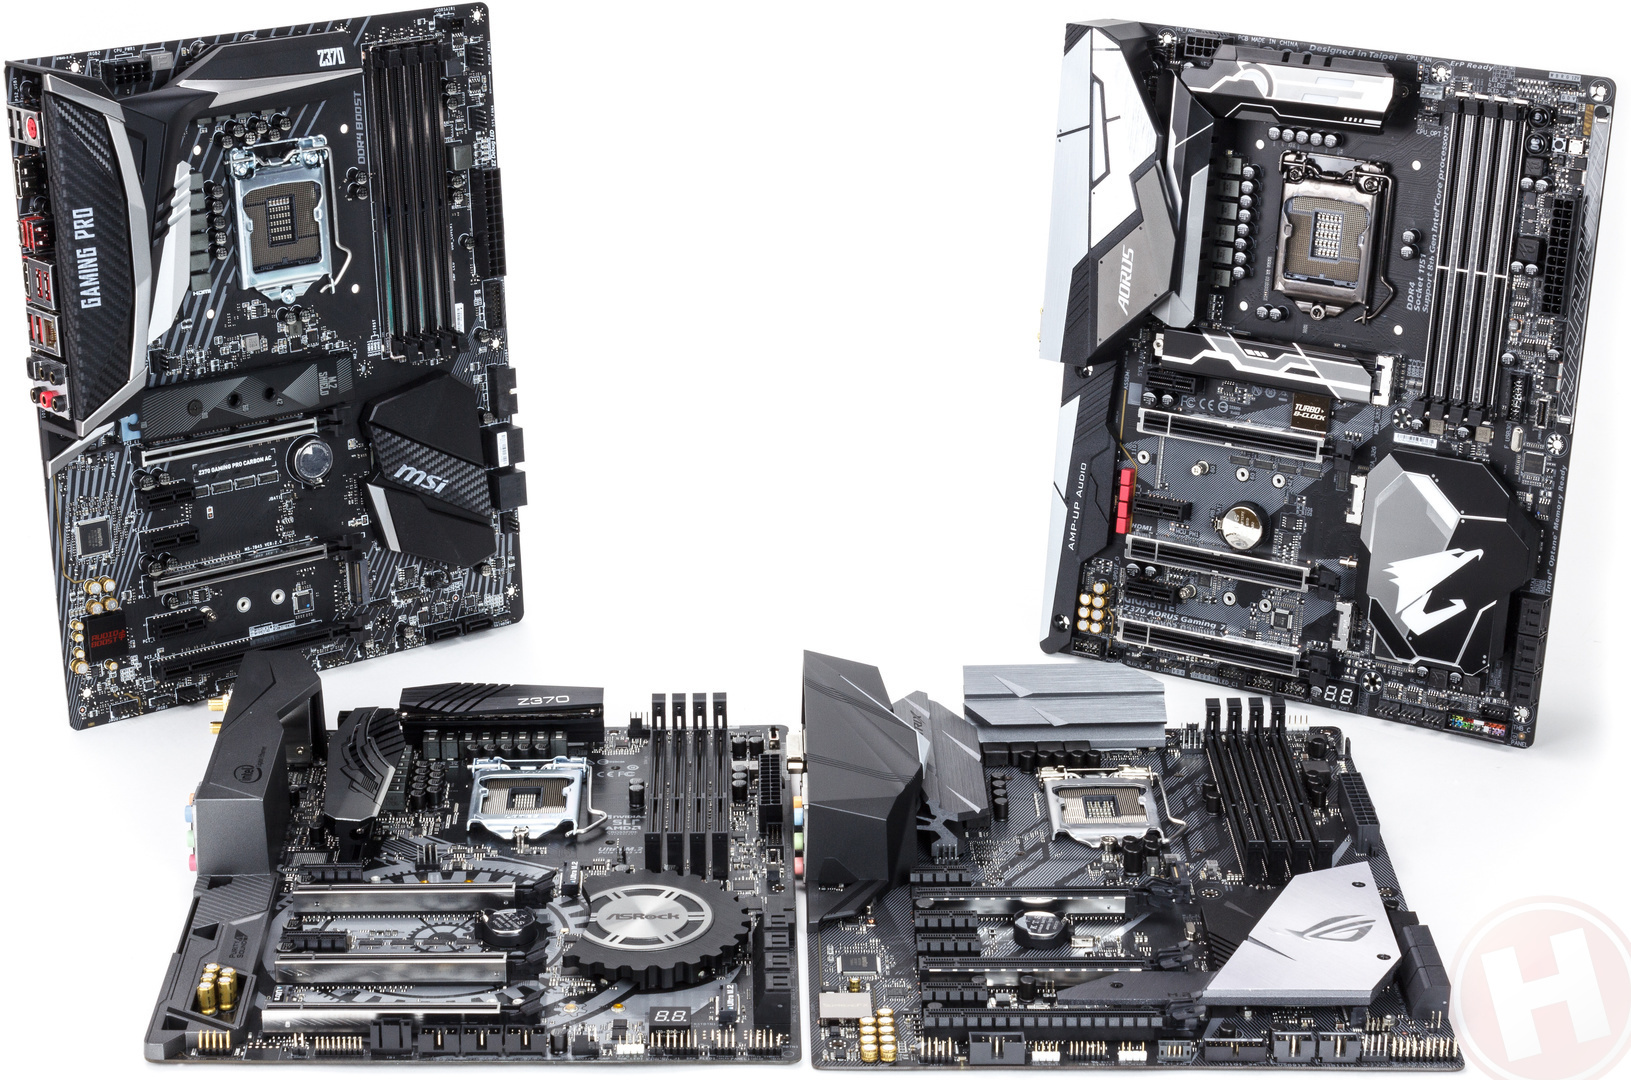 Intel Z370 motherboards round-up: 17 times Coffee Lake